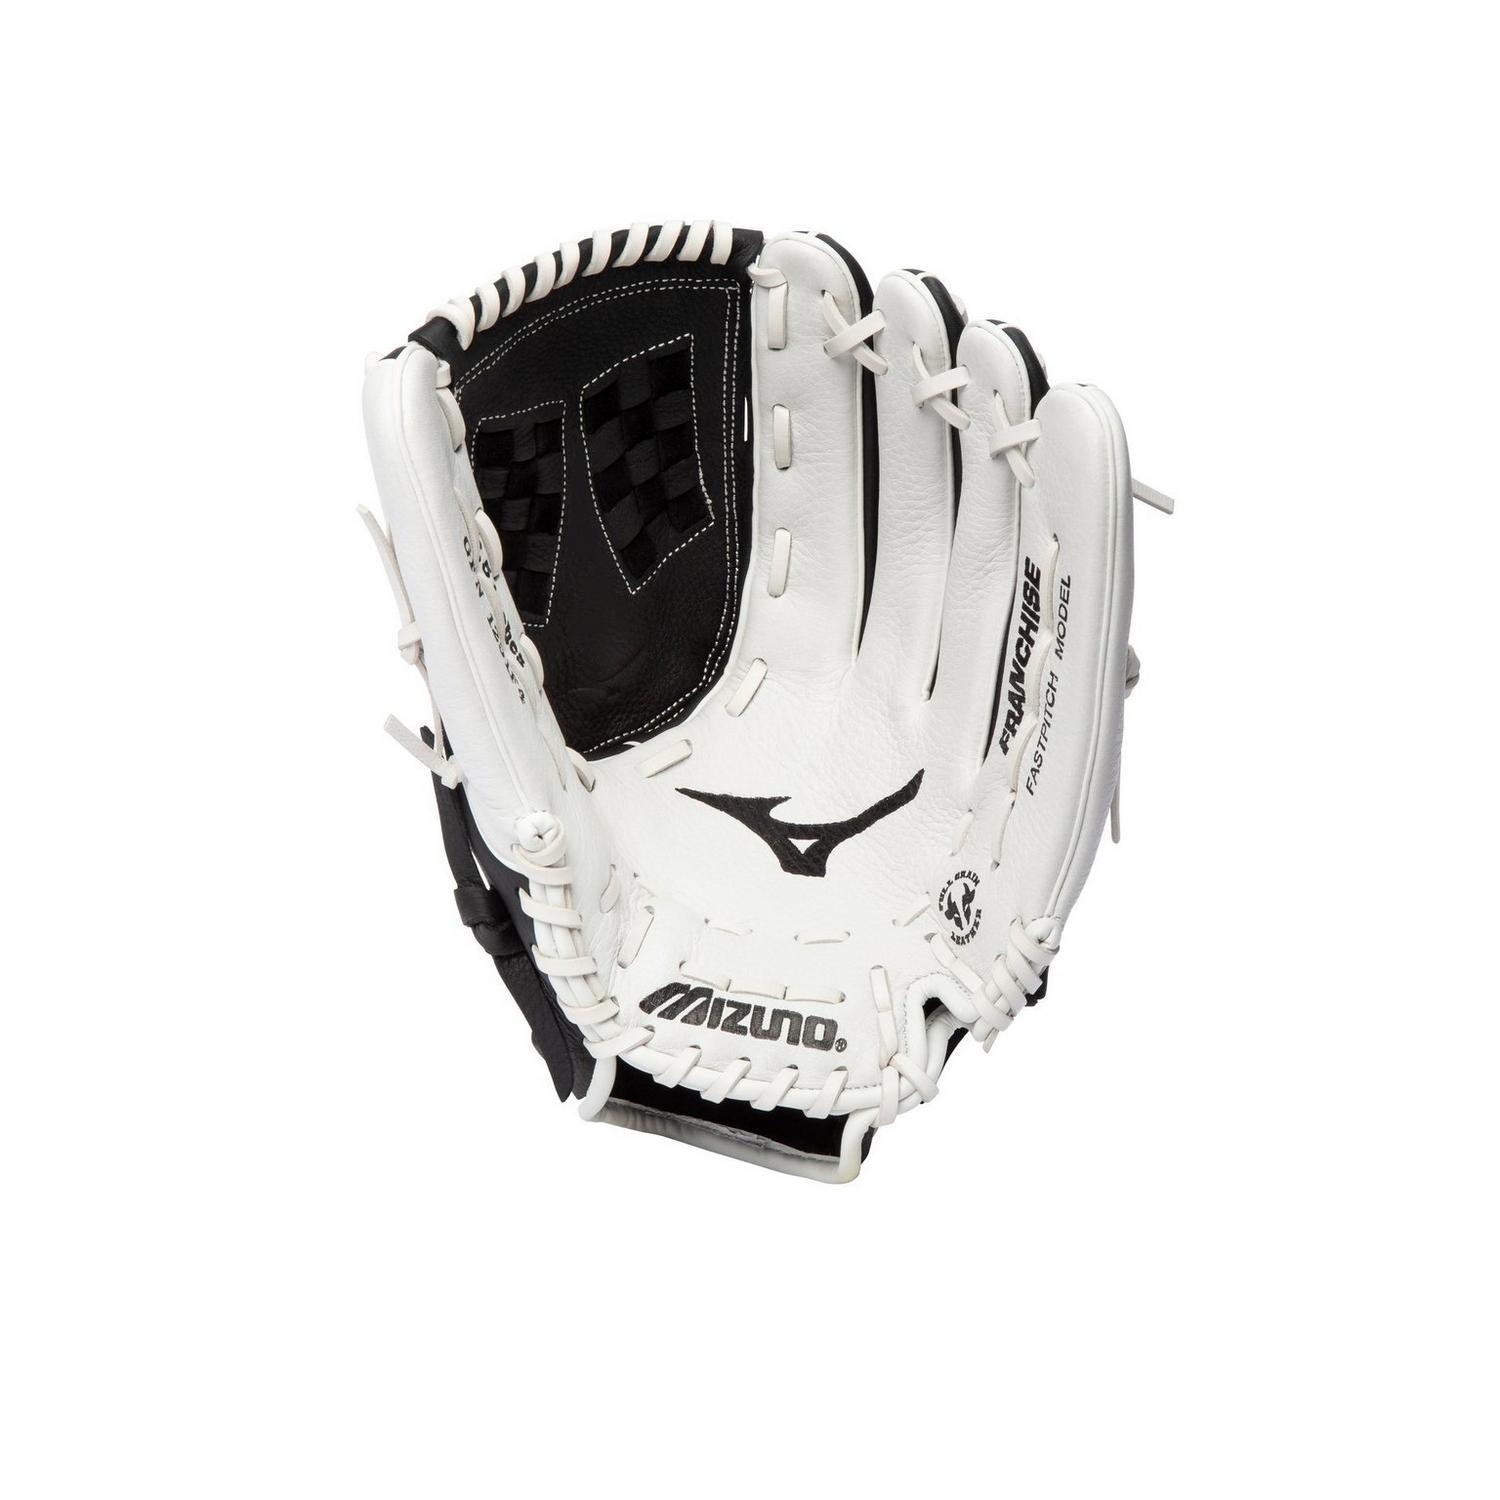 Franchise Series Fastpitch Softball Glove 12.5" - Sports Excellence